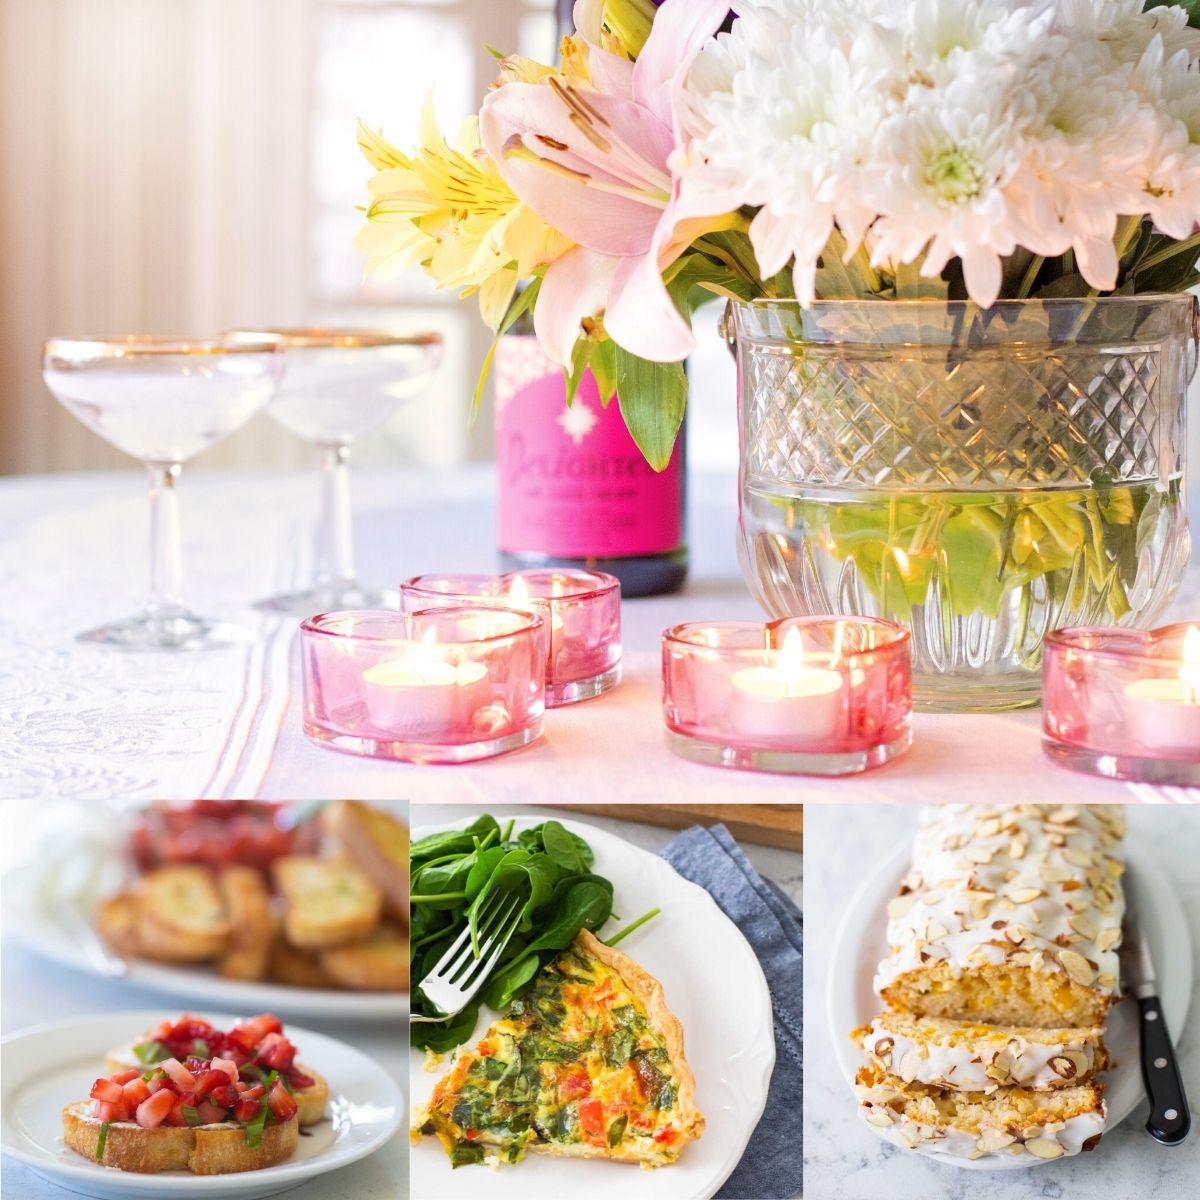 A photo collage shows a brunch table with fresh flowers and candles and a few sample recipes below.